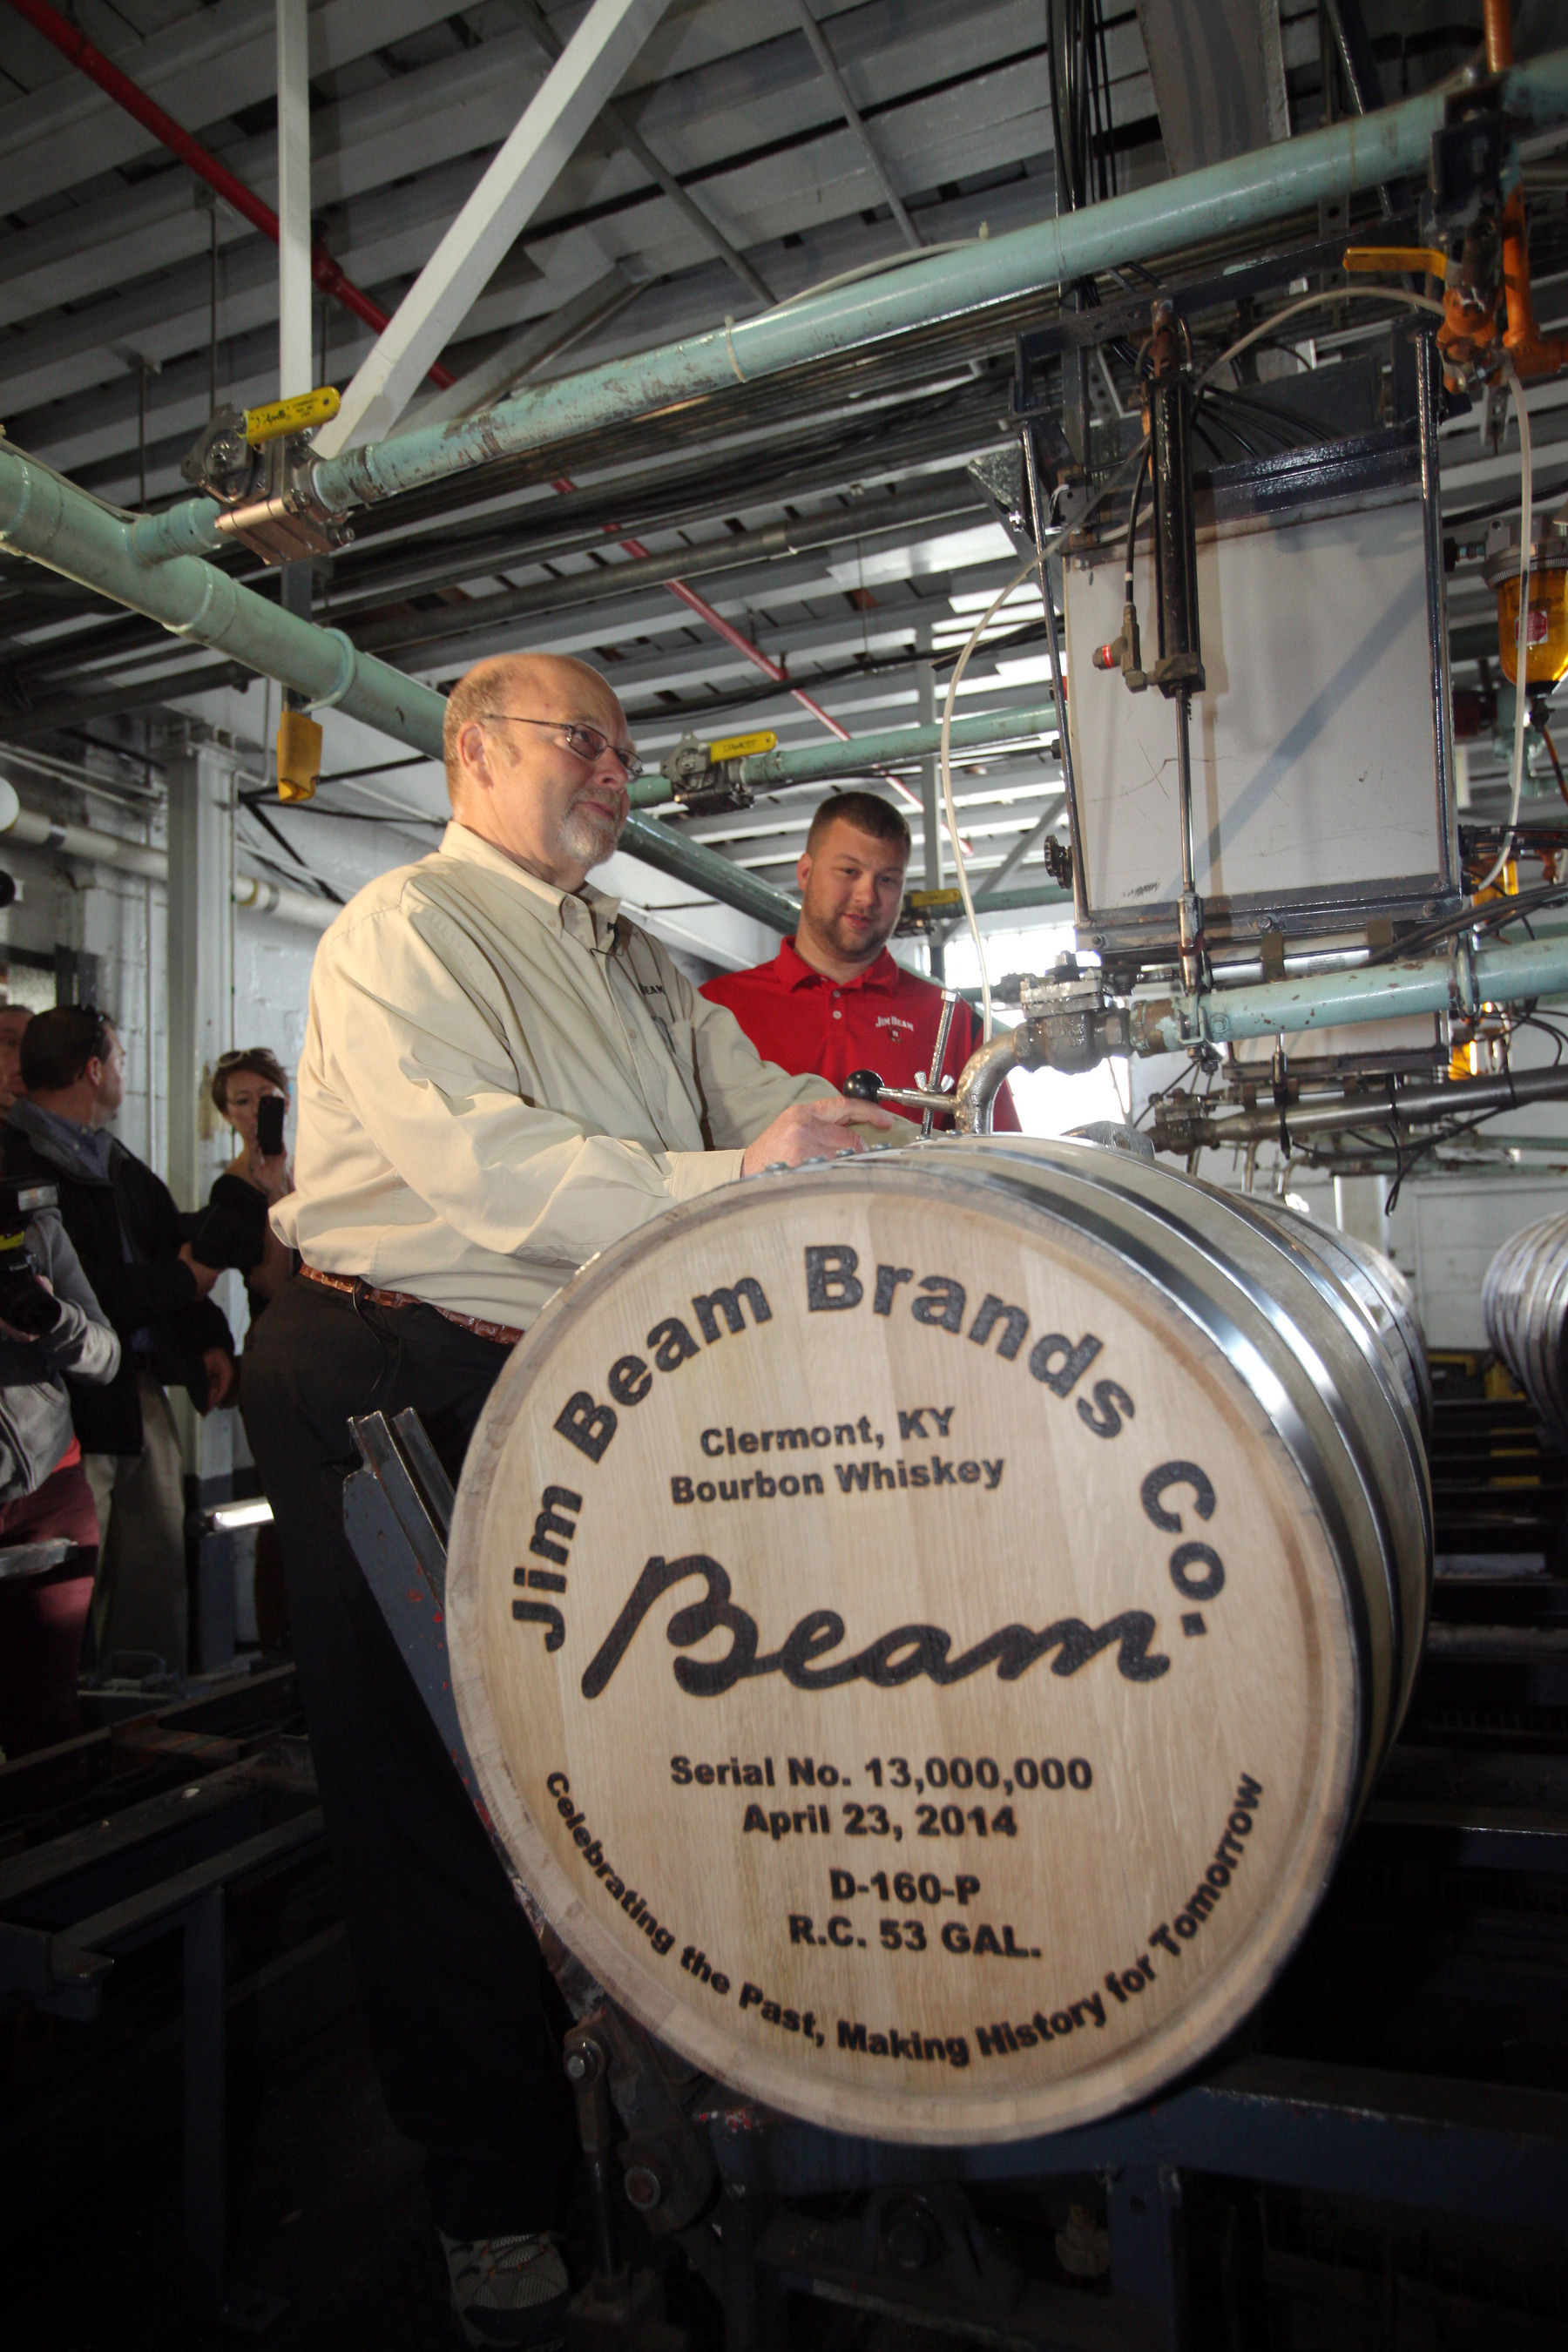 Jim Beam(R) Bourbon made history April 23, 2014, by filling its 13 millionth barrel of bourbon since Prohibition - an industry first. Fred Noe, Jim Beam's great-grandson and seventh generation master distiller, was joined by his son, Freddie Noe, an eight generation Beam at the company's flagship distillery in Clermont, Ky., for the milestone event.  (PRNewsFoto/Beam Inc.)